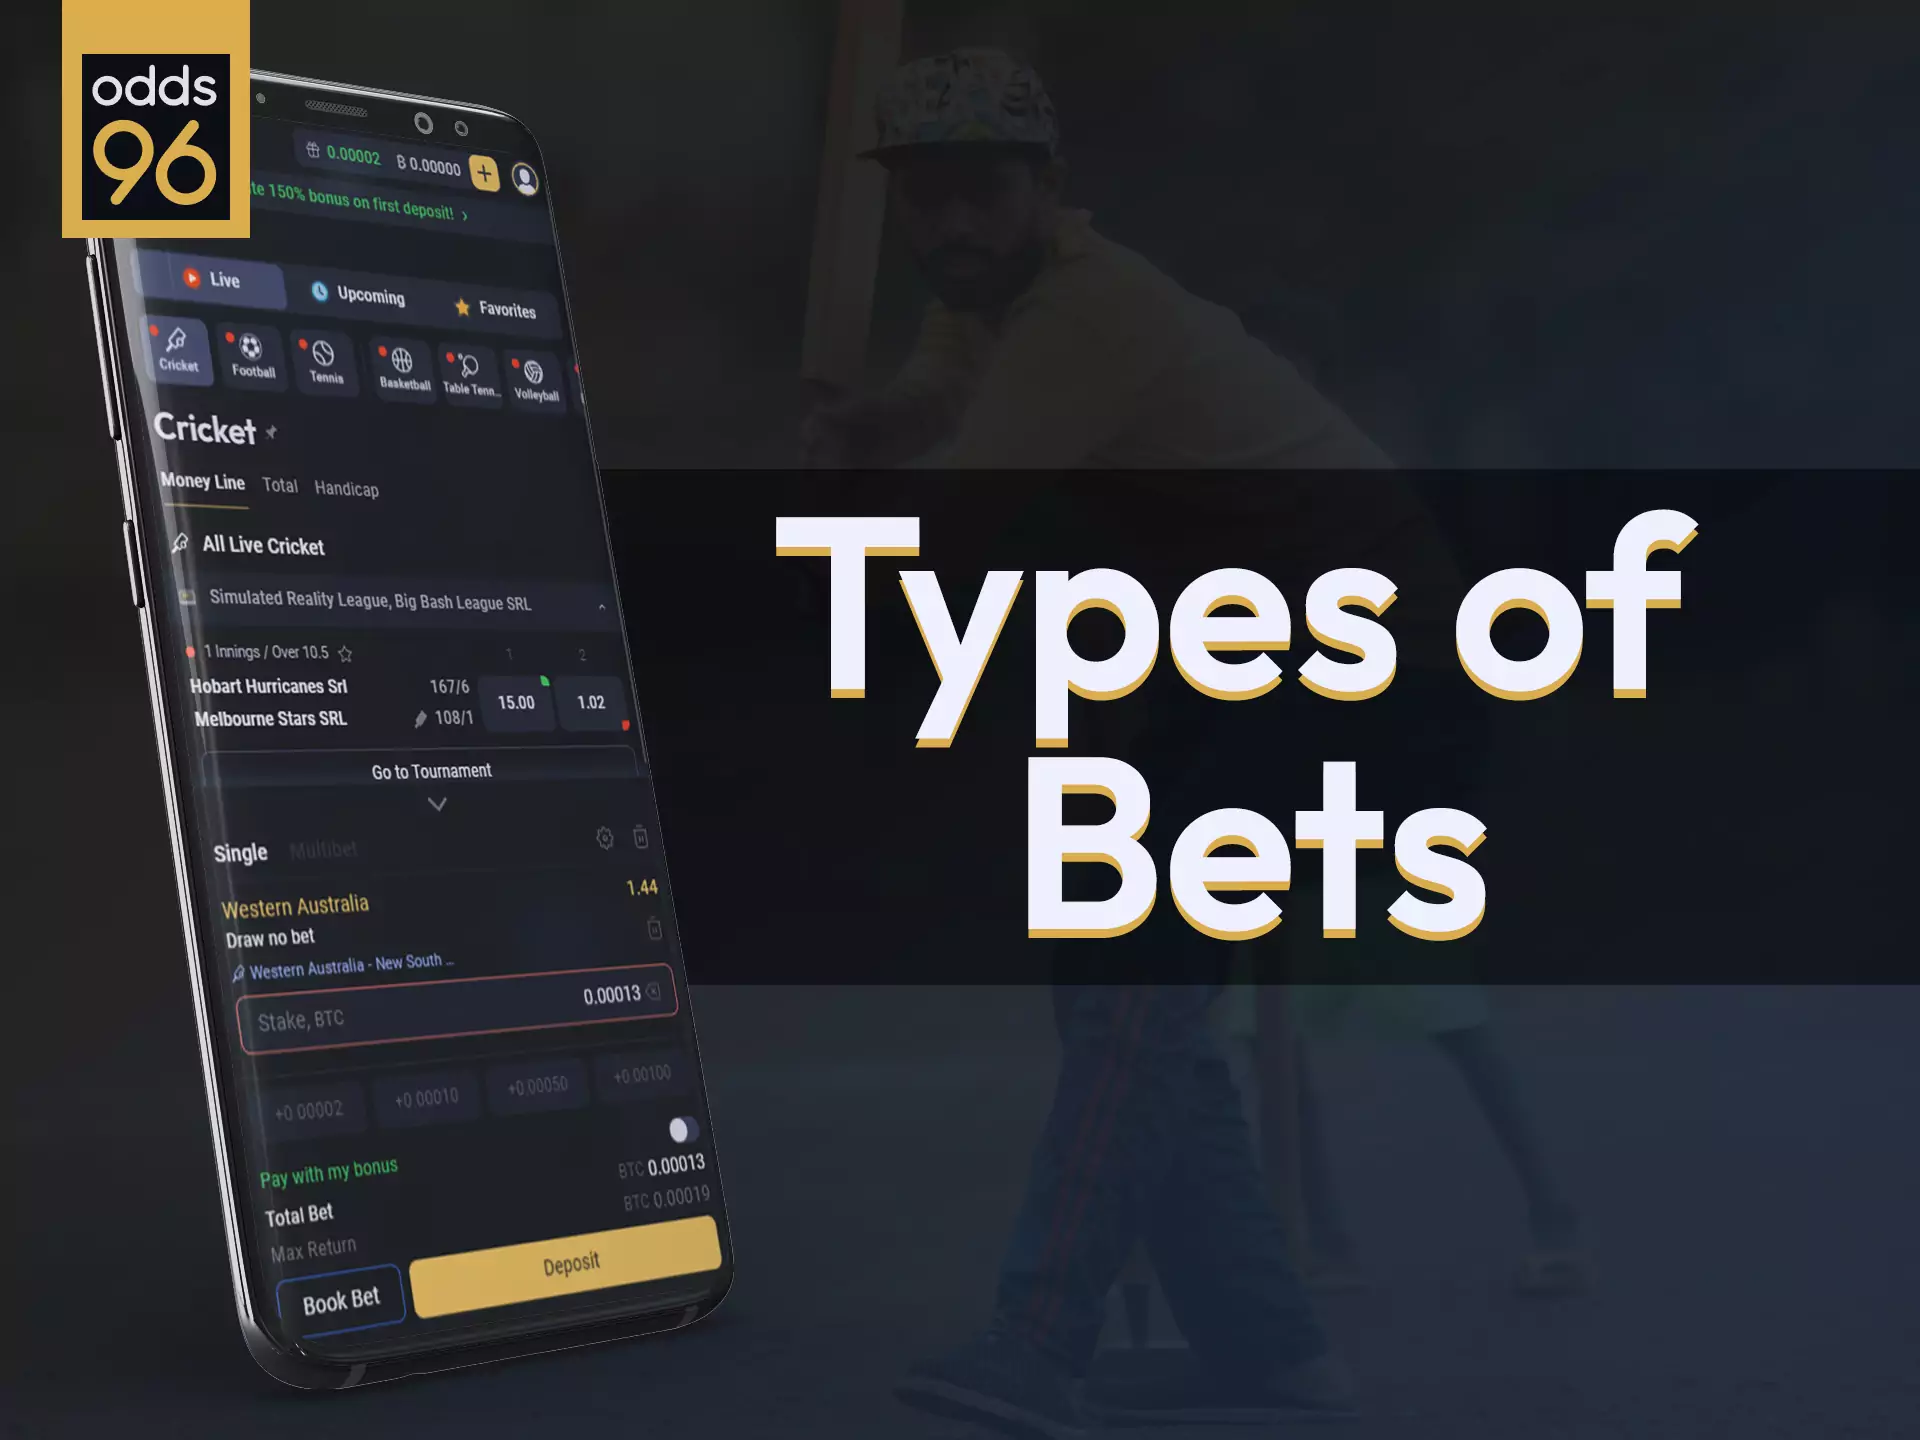 Use different types of bets in Odds96, you will find the most convenient for yourself.